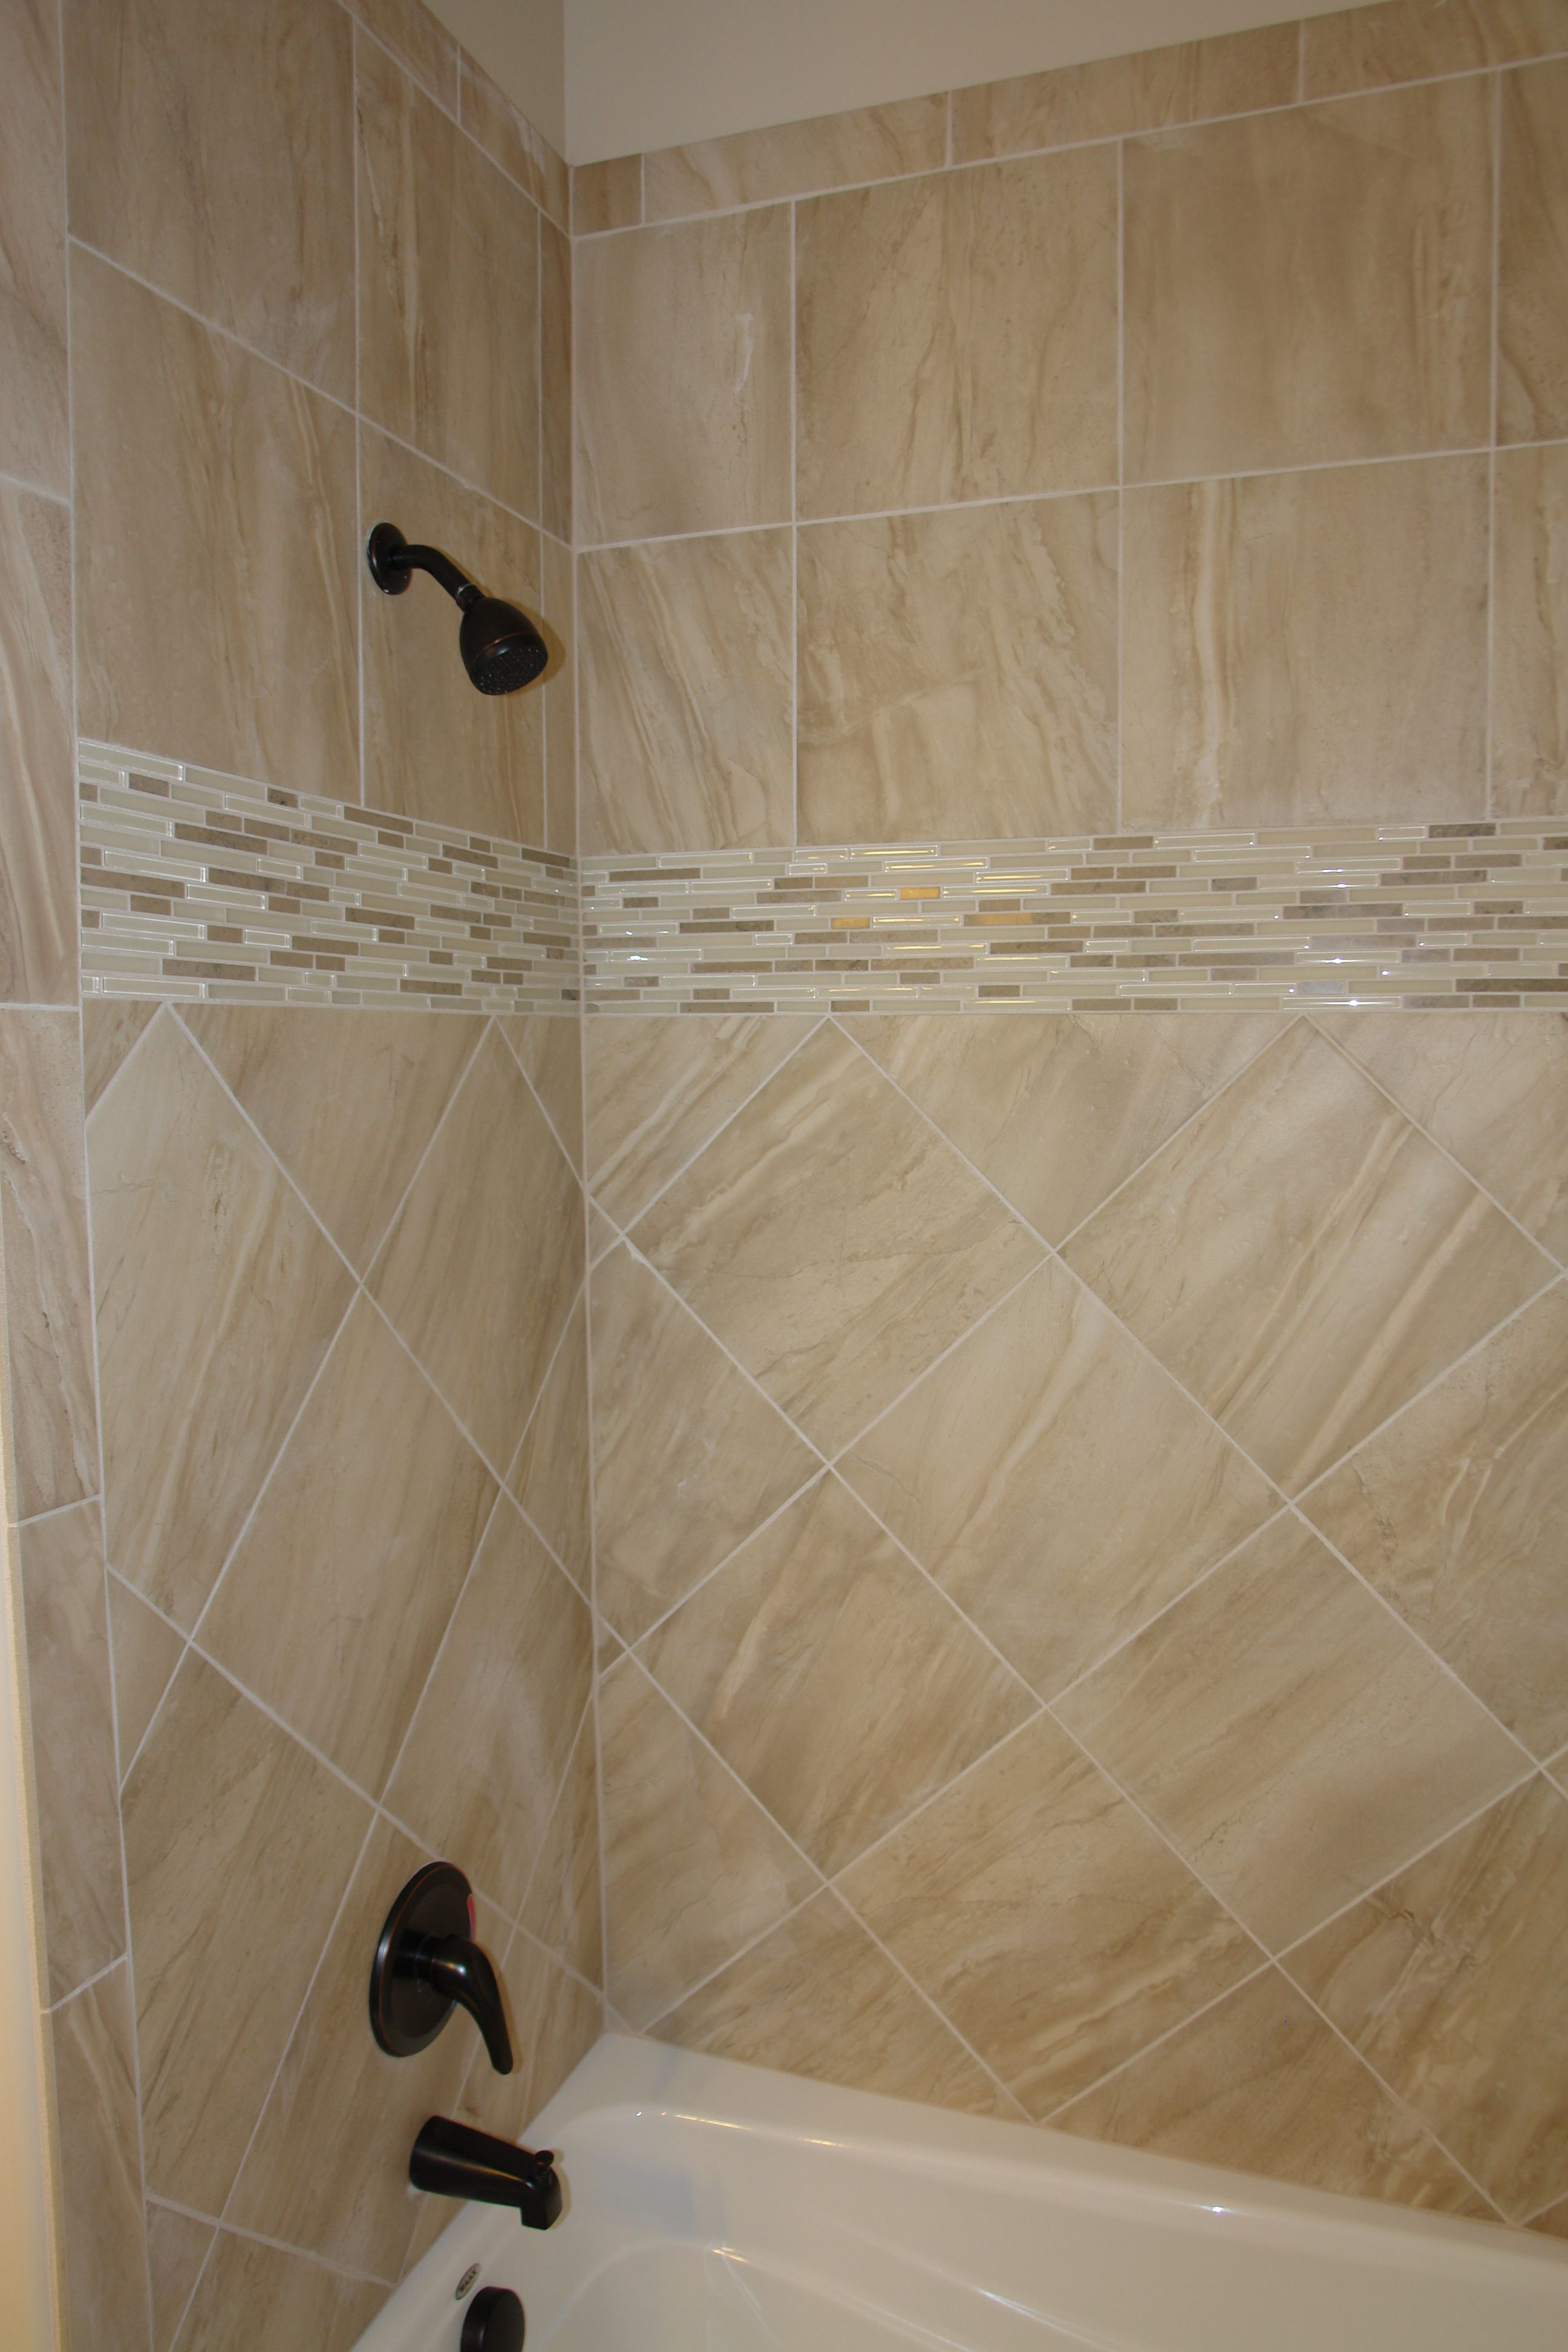 hardwood floor refinishing boise of tile shower with nice tile glass mosaic band capell flooring and with tile shower with nice tile glass mosaic band capell flooring and interiors located in meridian id serving the treasure valley boise caldwell